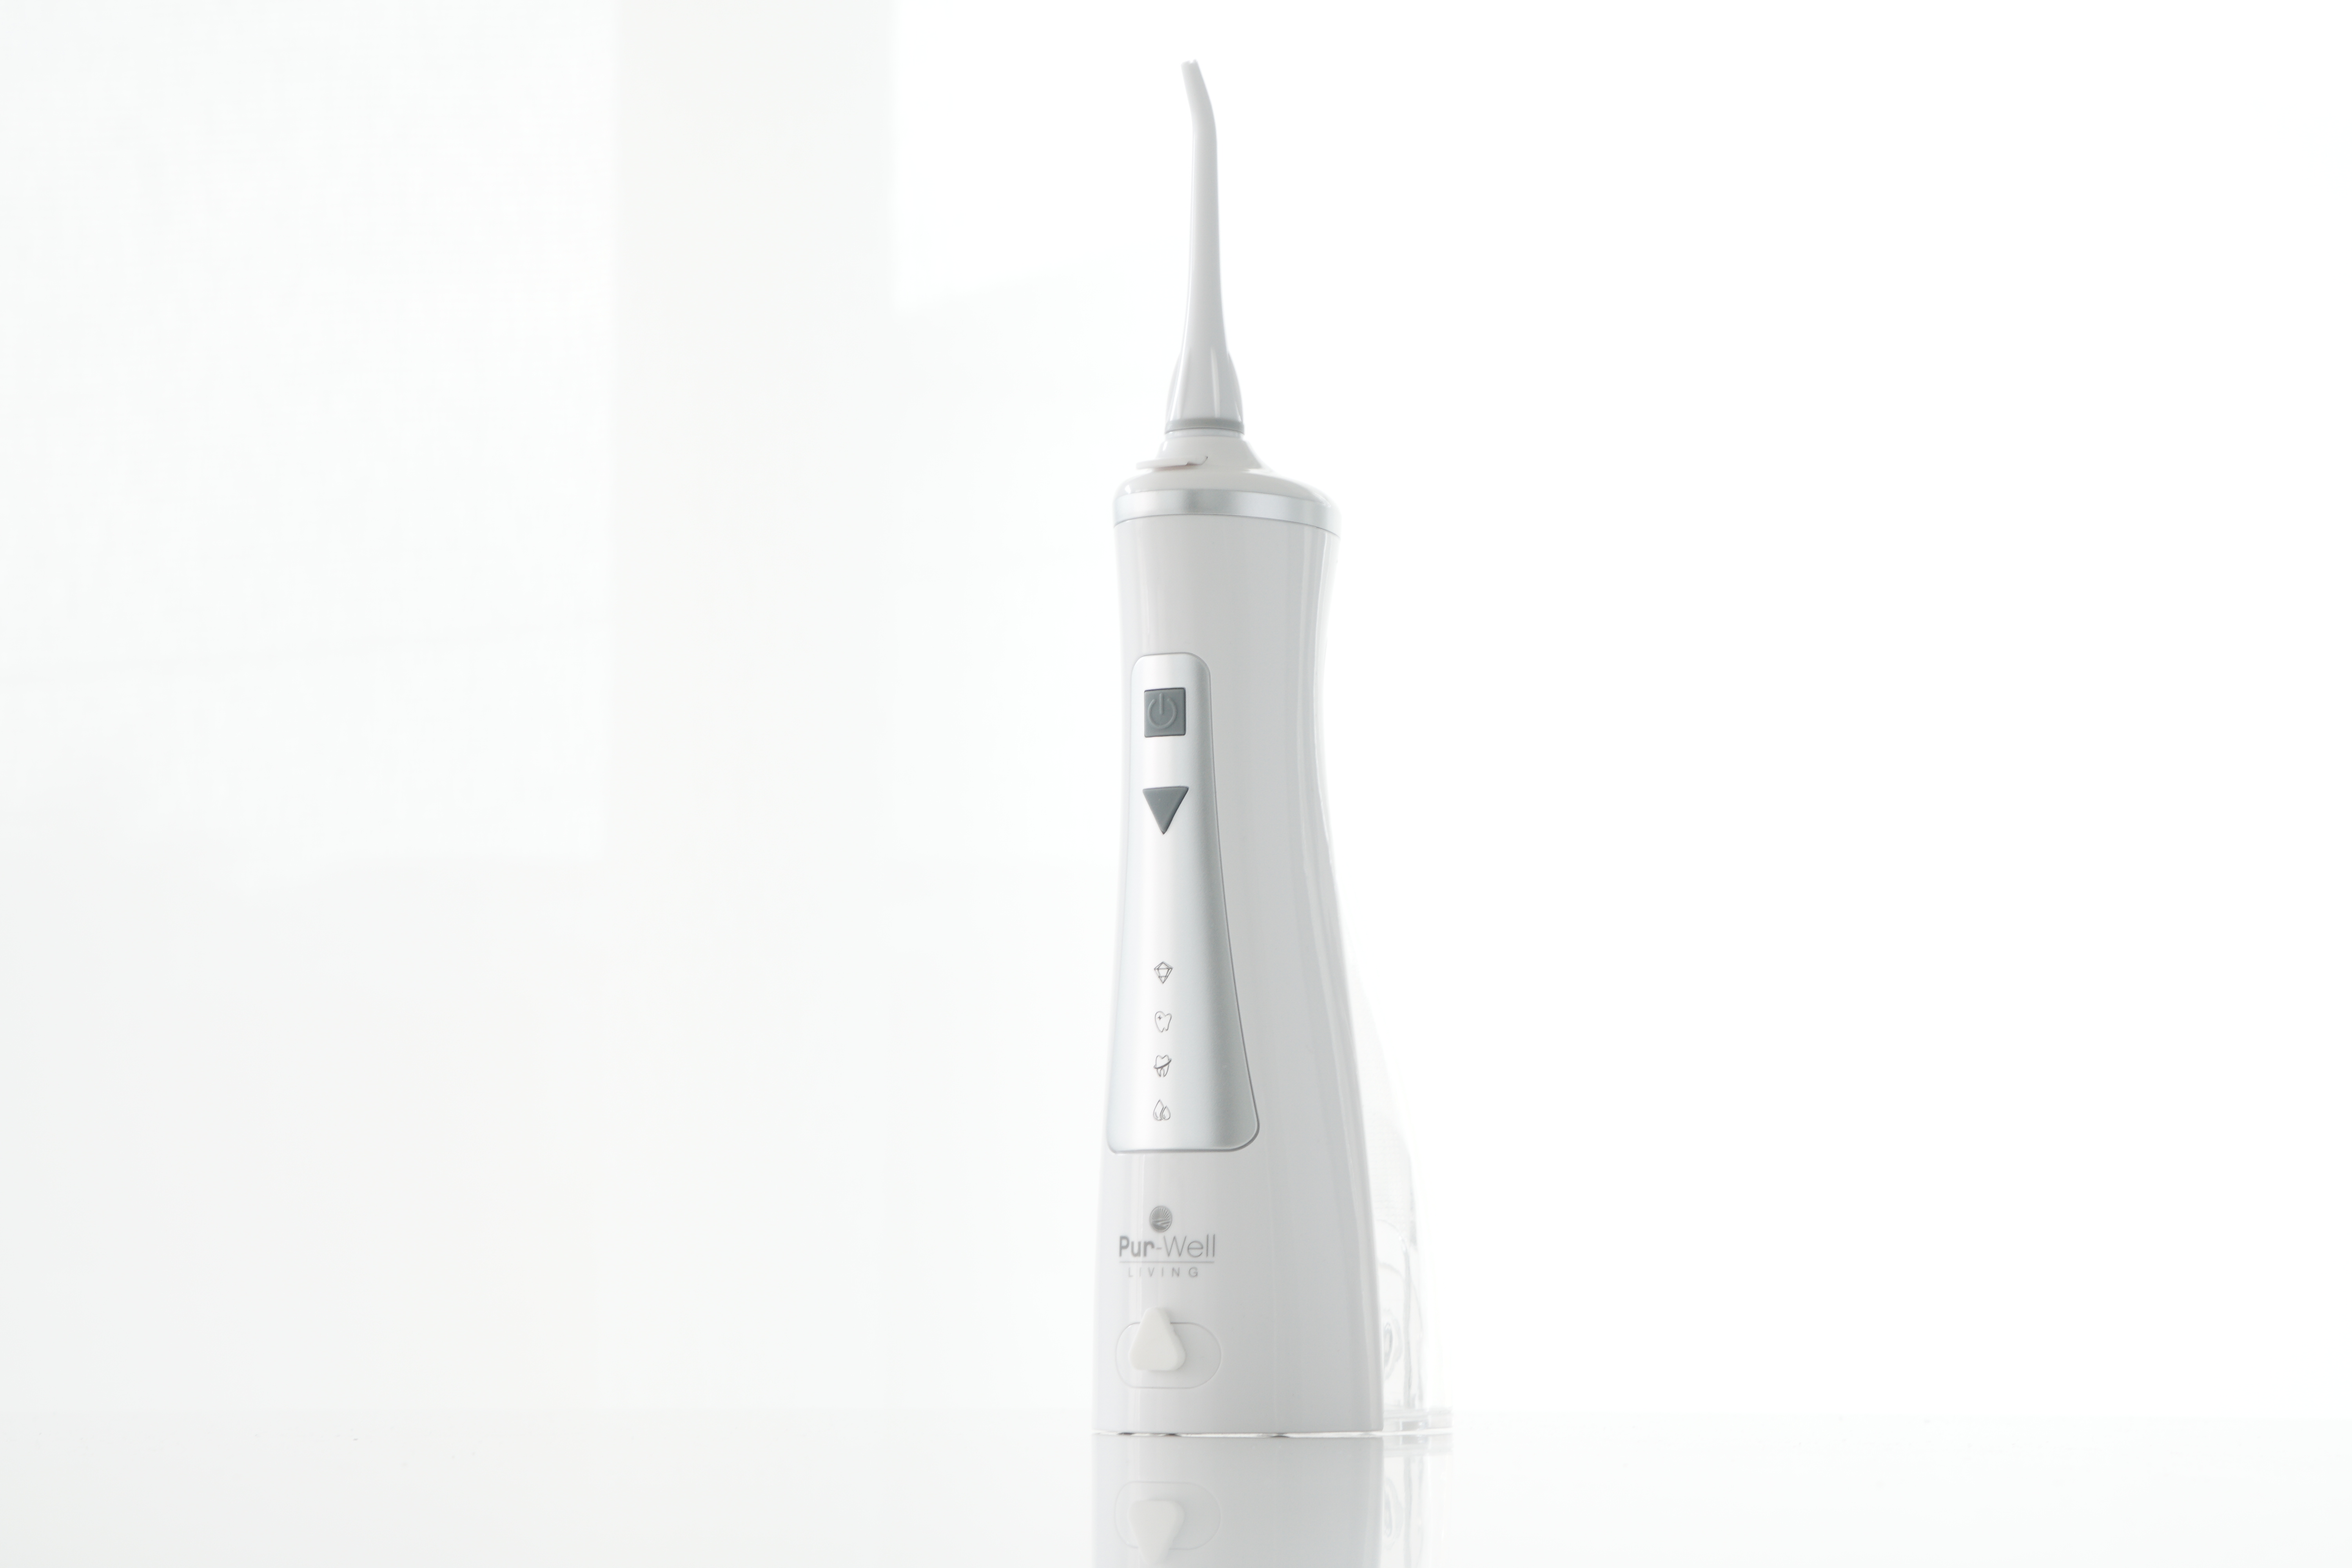 Pur-Well Living Pur Clean Smart Power Flosser Water Pick - image 3 of 7